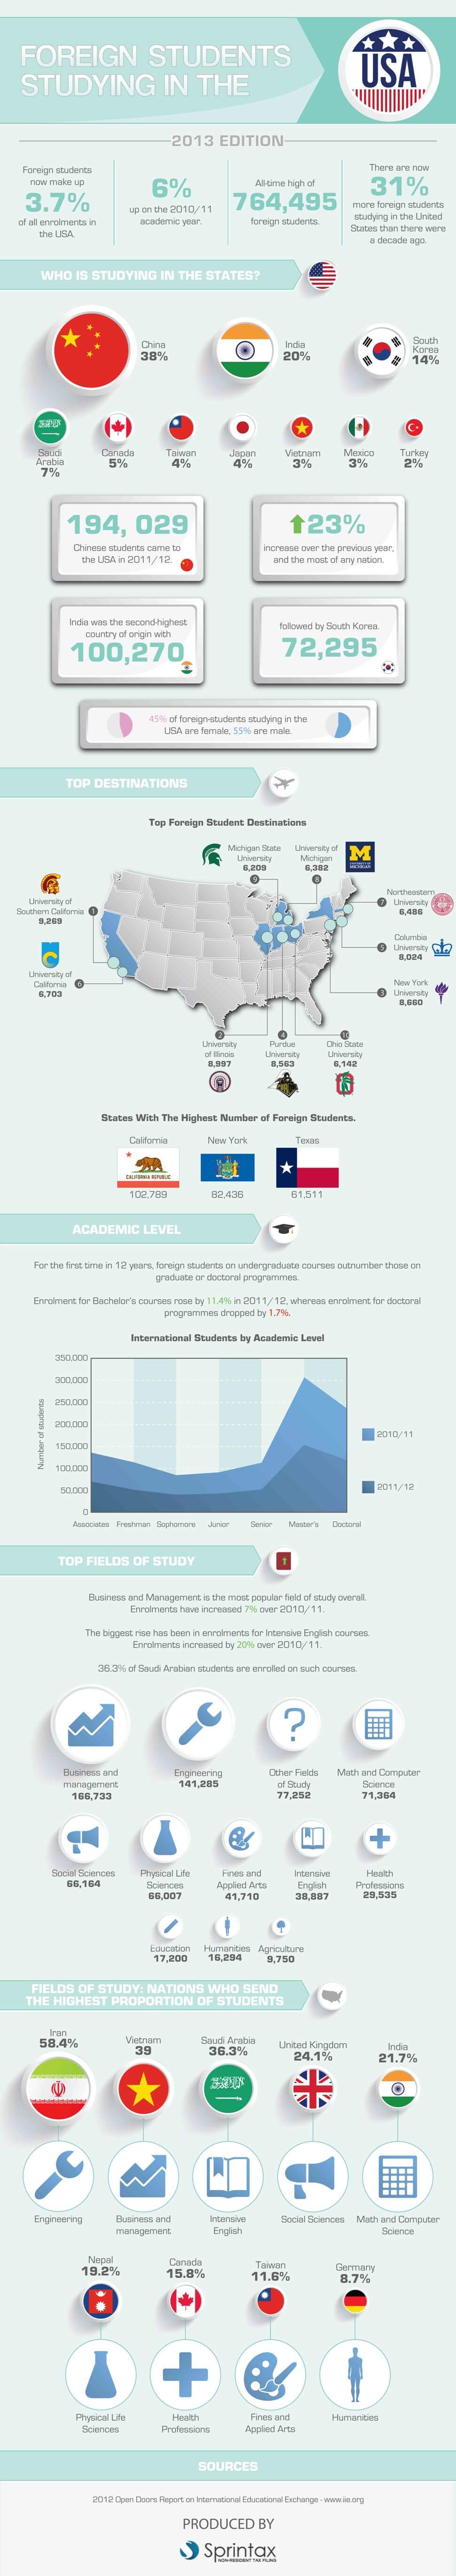 Foreign Students Studying in the USA (infographic)